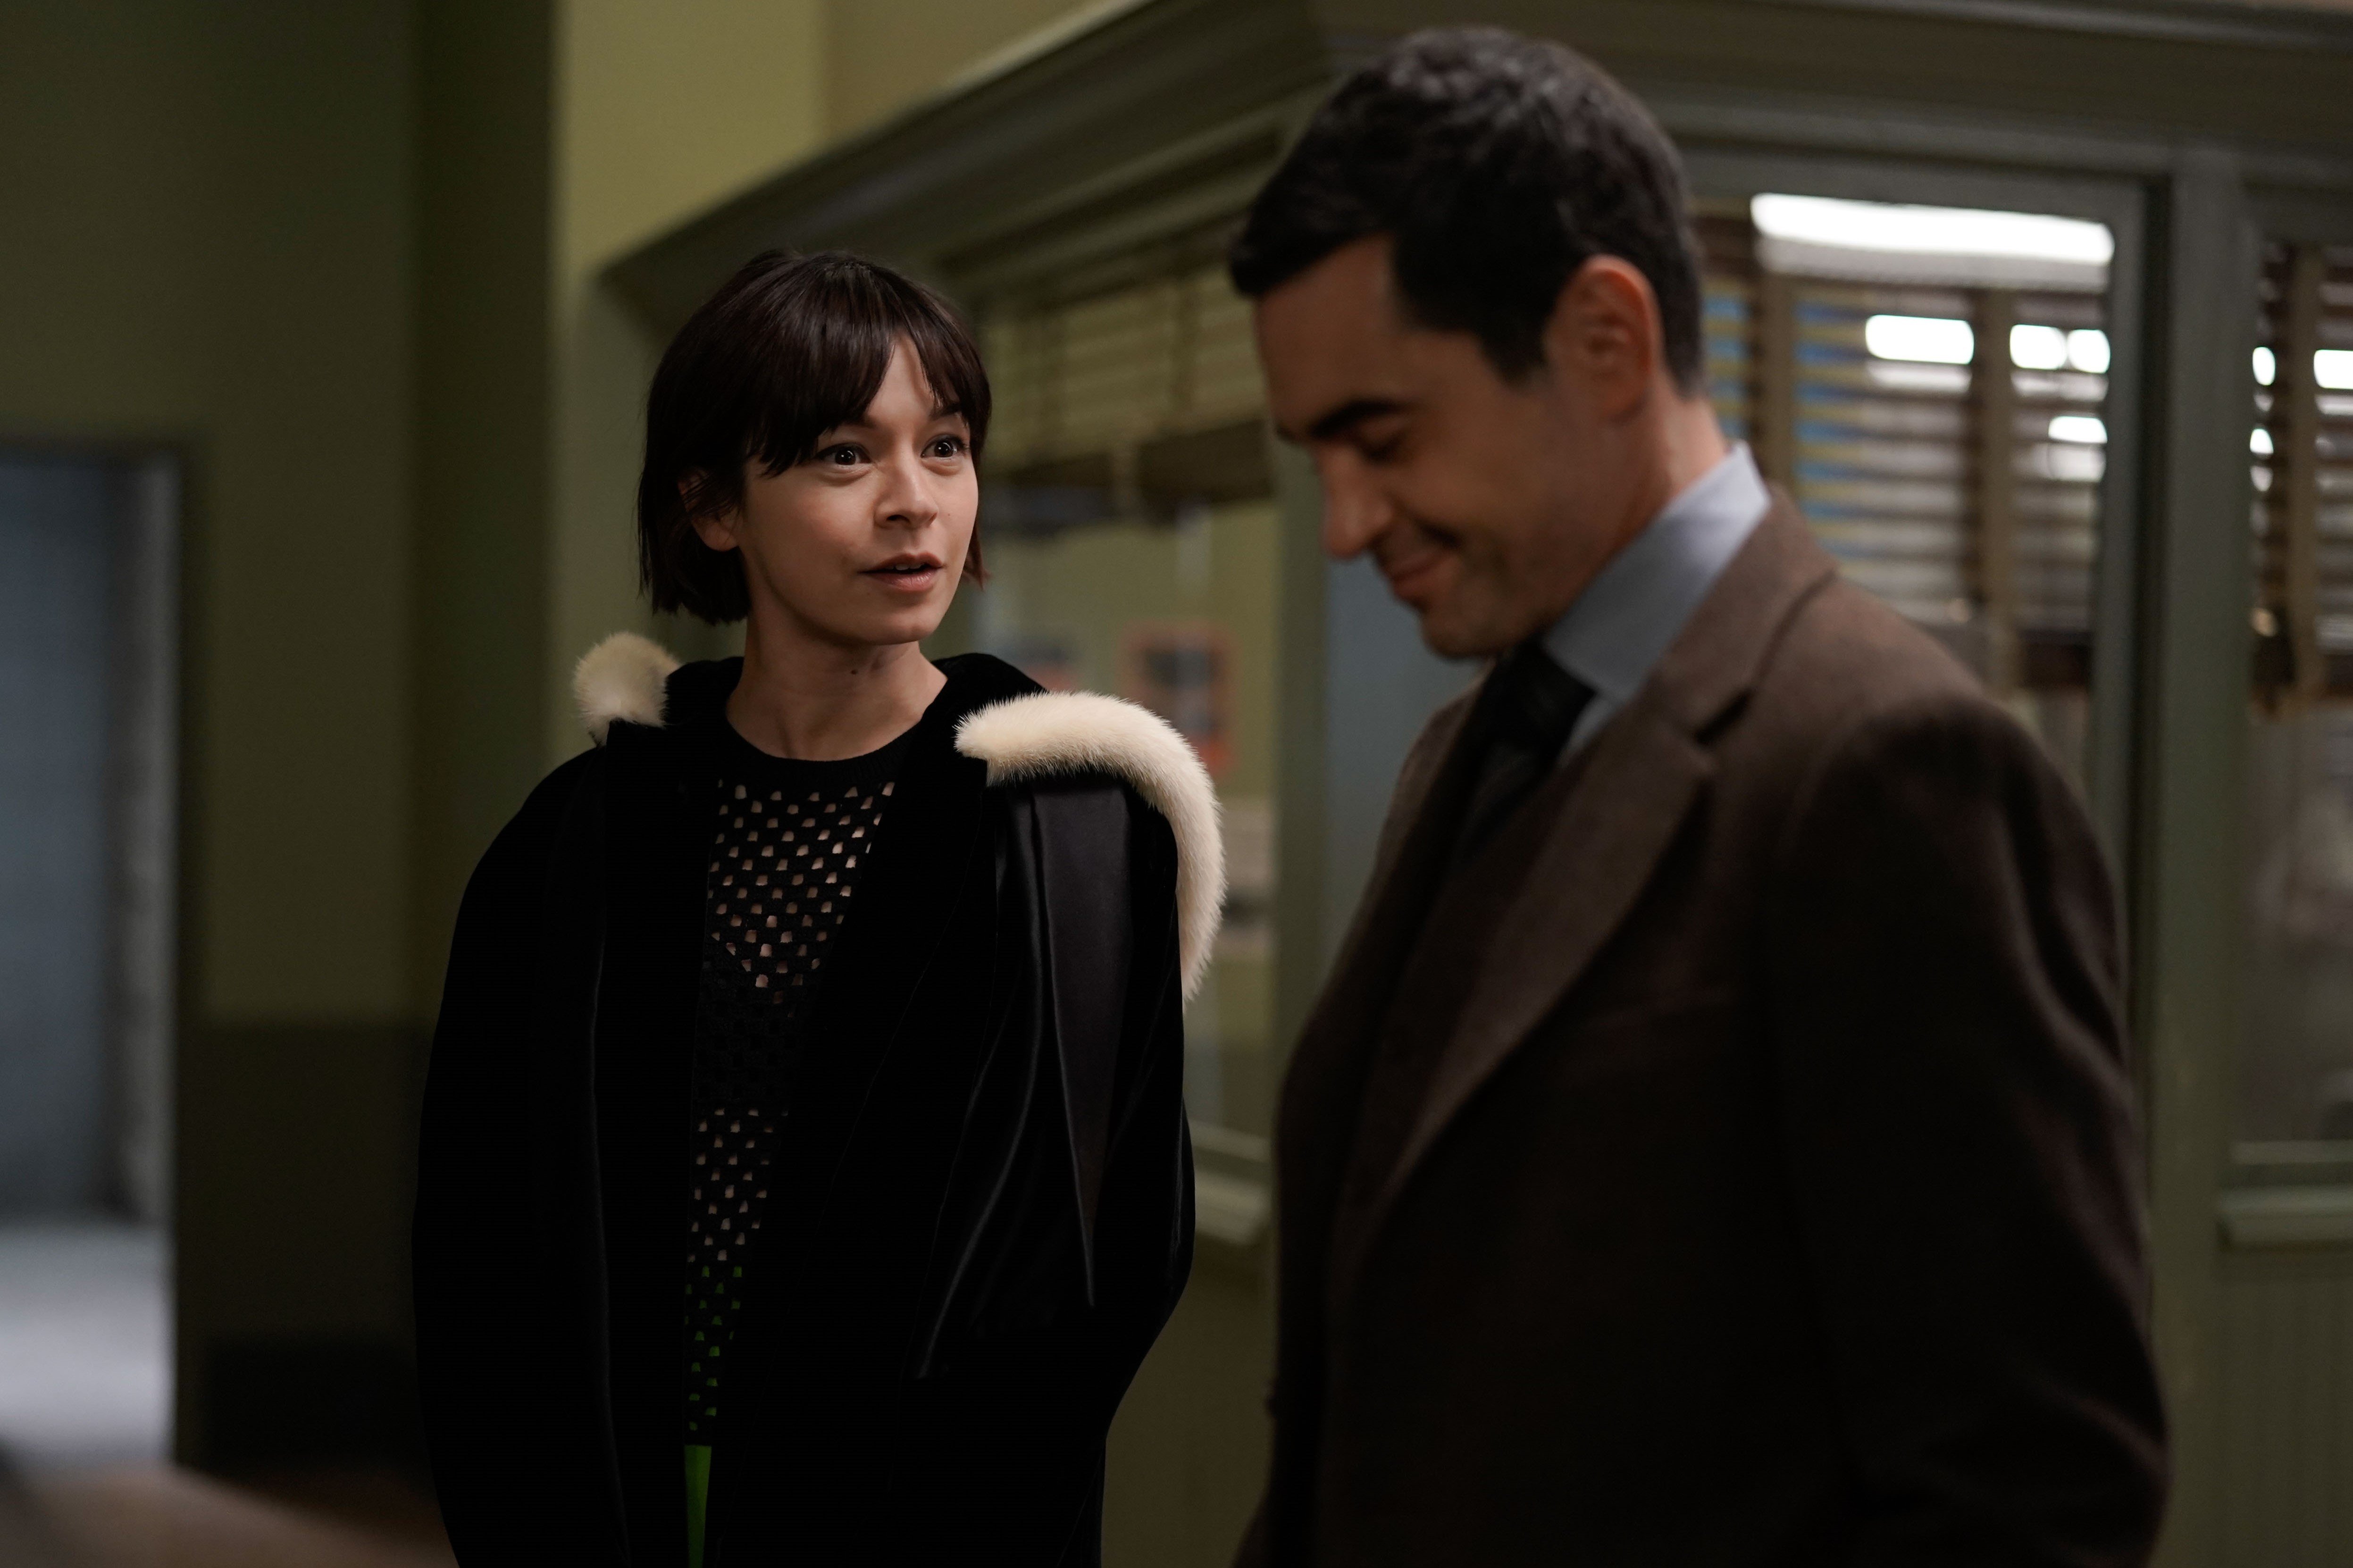 Julia Chan as Ava Green and Ramón Rodríguez as Will Trent in 'Will Trent' Season 1 Episode 5, 'The Look Out.'